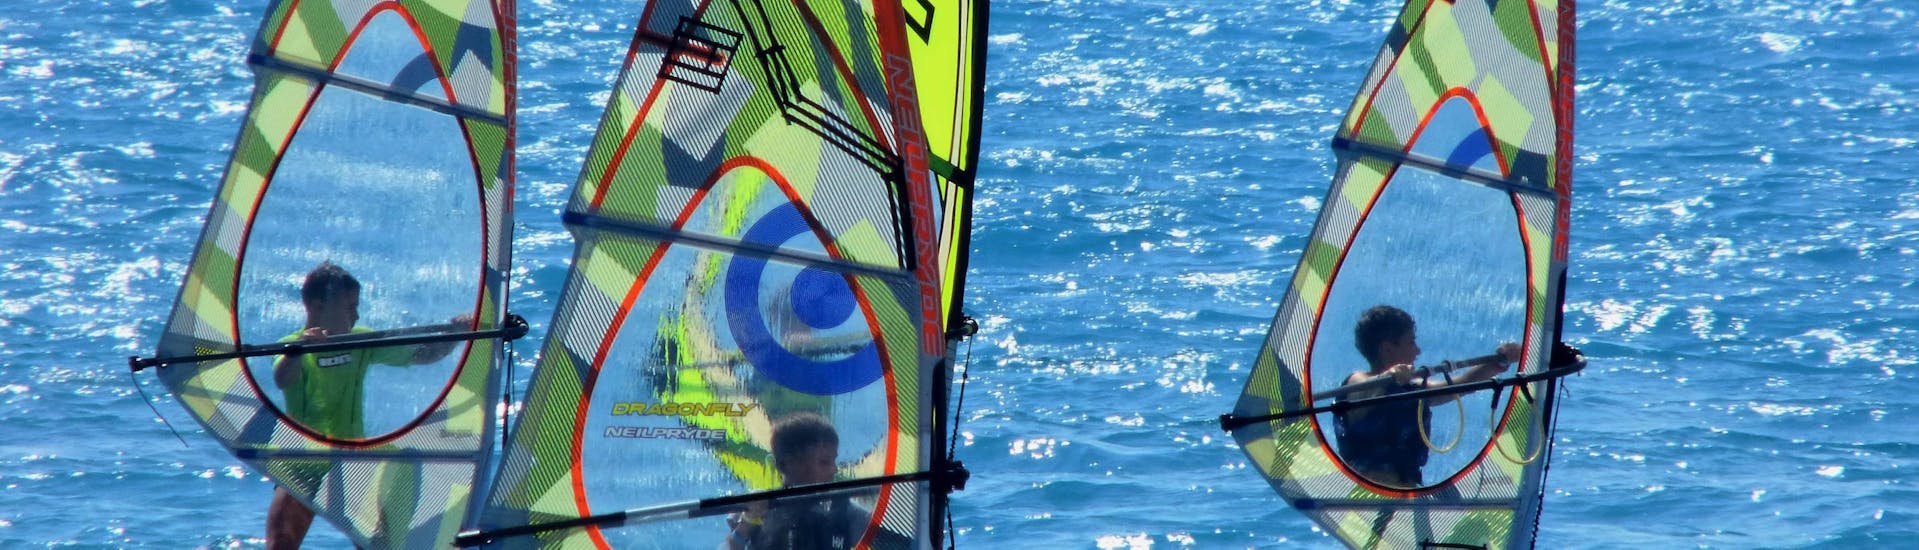 Windsurfing Lessons for Kids & Adults - Beginners with Windsurfers' World Rhodes.